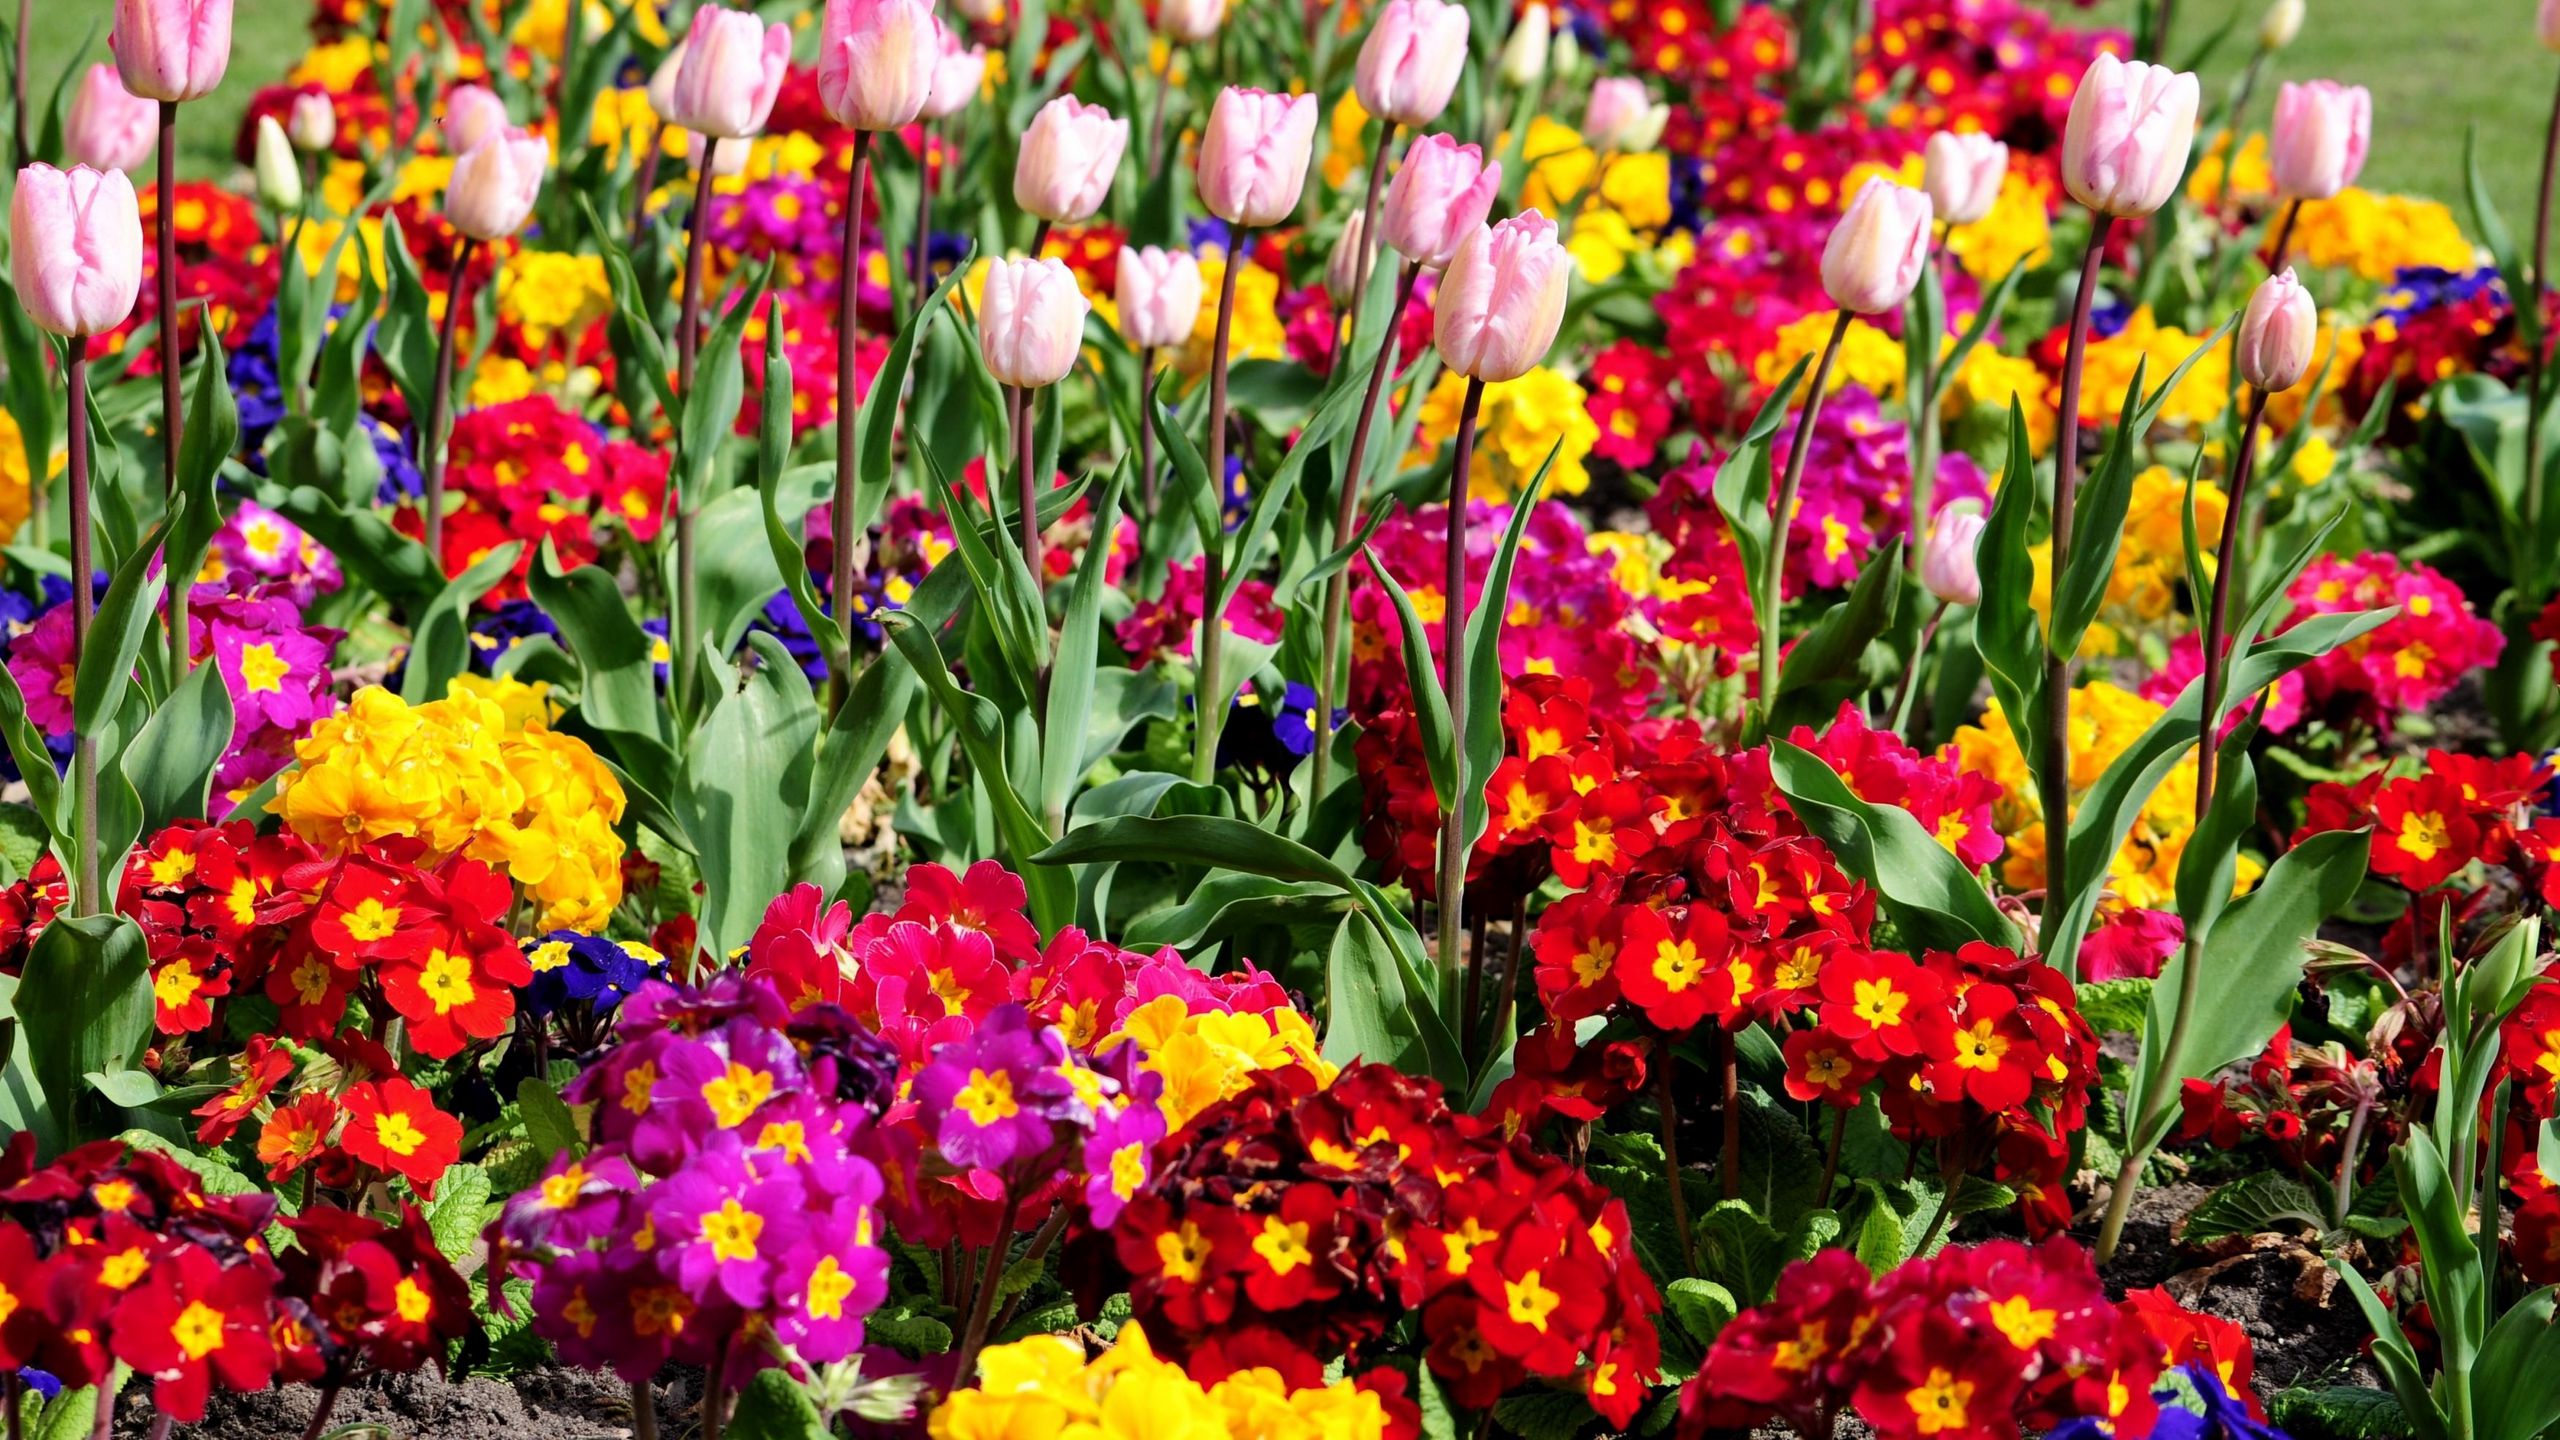 Download wallpaper 2560x1440 tulips, flowers, bright, flowerbed, spring, greens widescreen 16:9 HD background